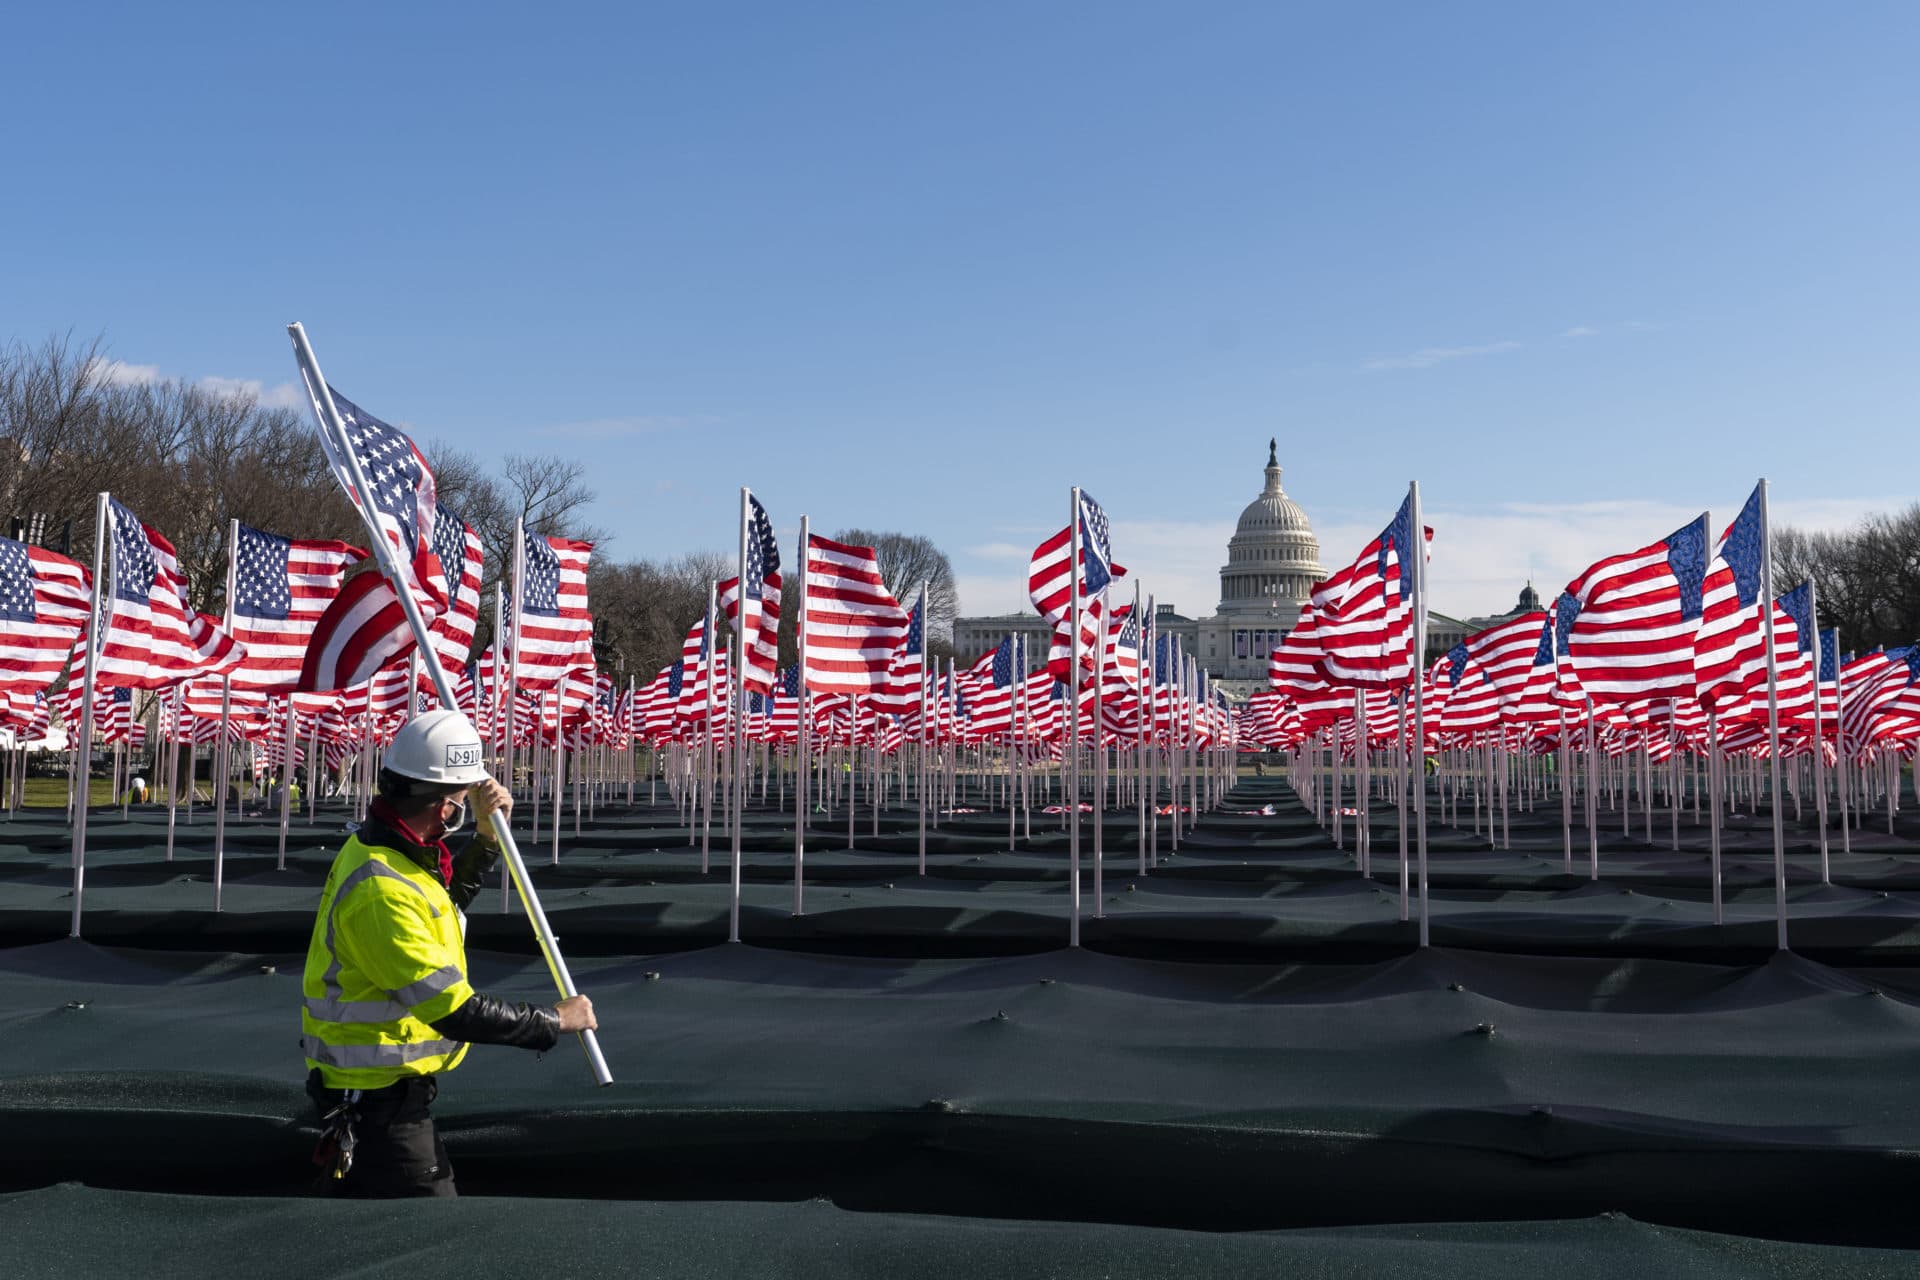 Workers place flags on the National Mall on Monday. (Alex Brandon/AP)